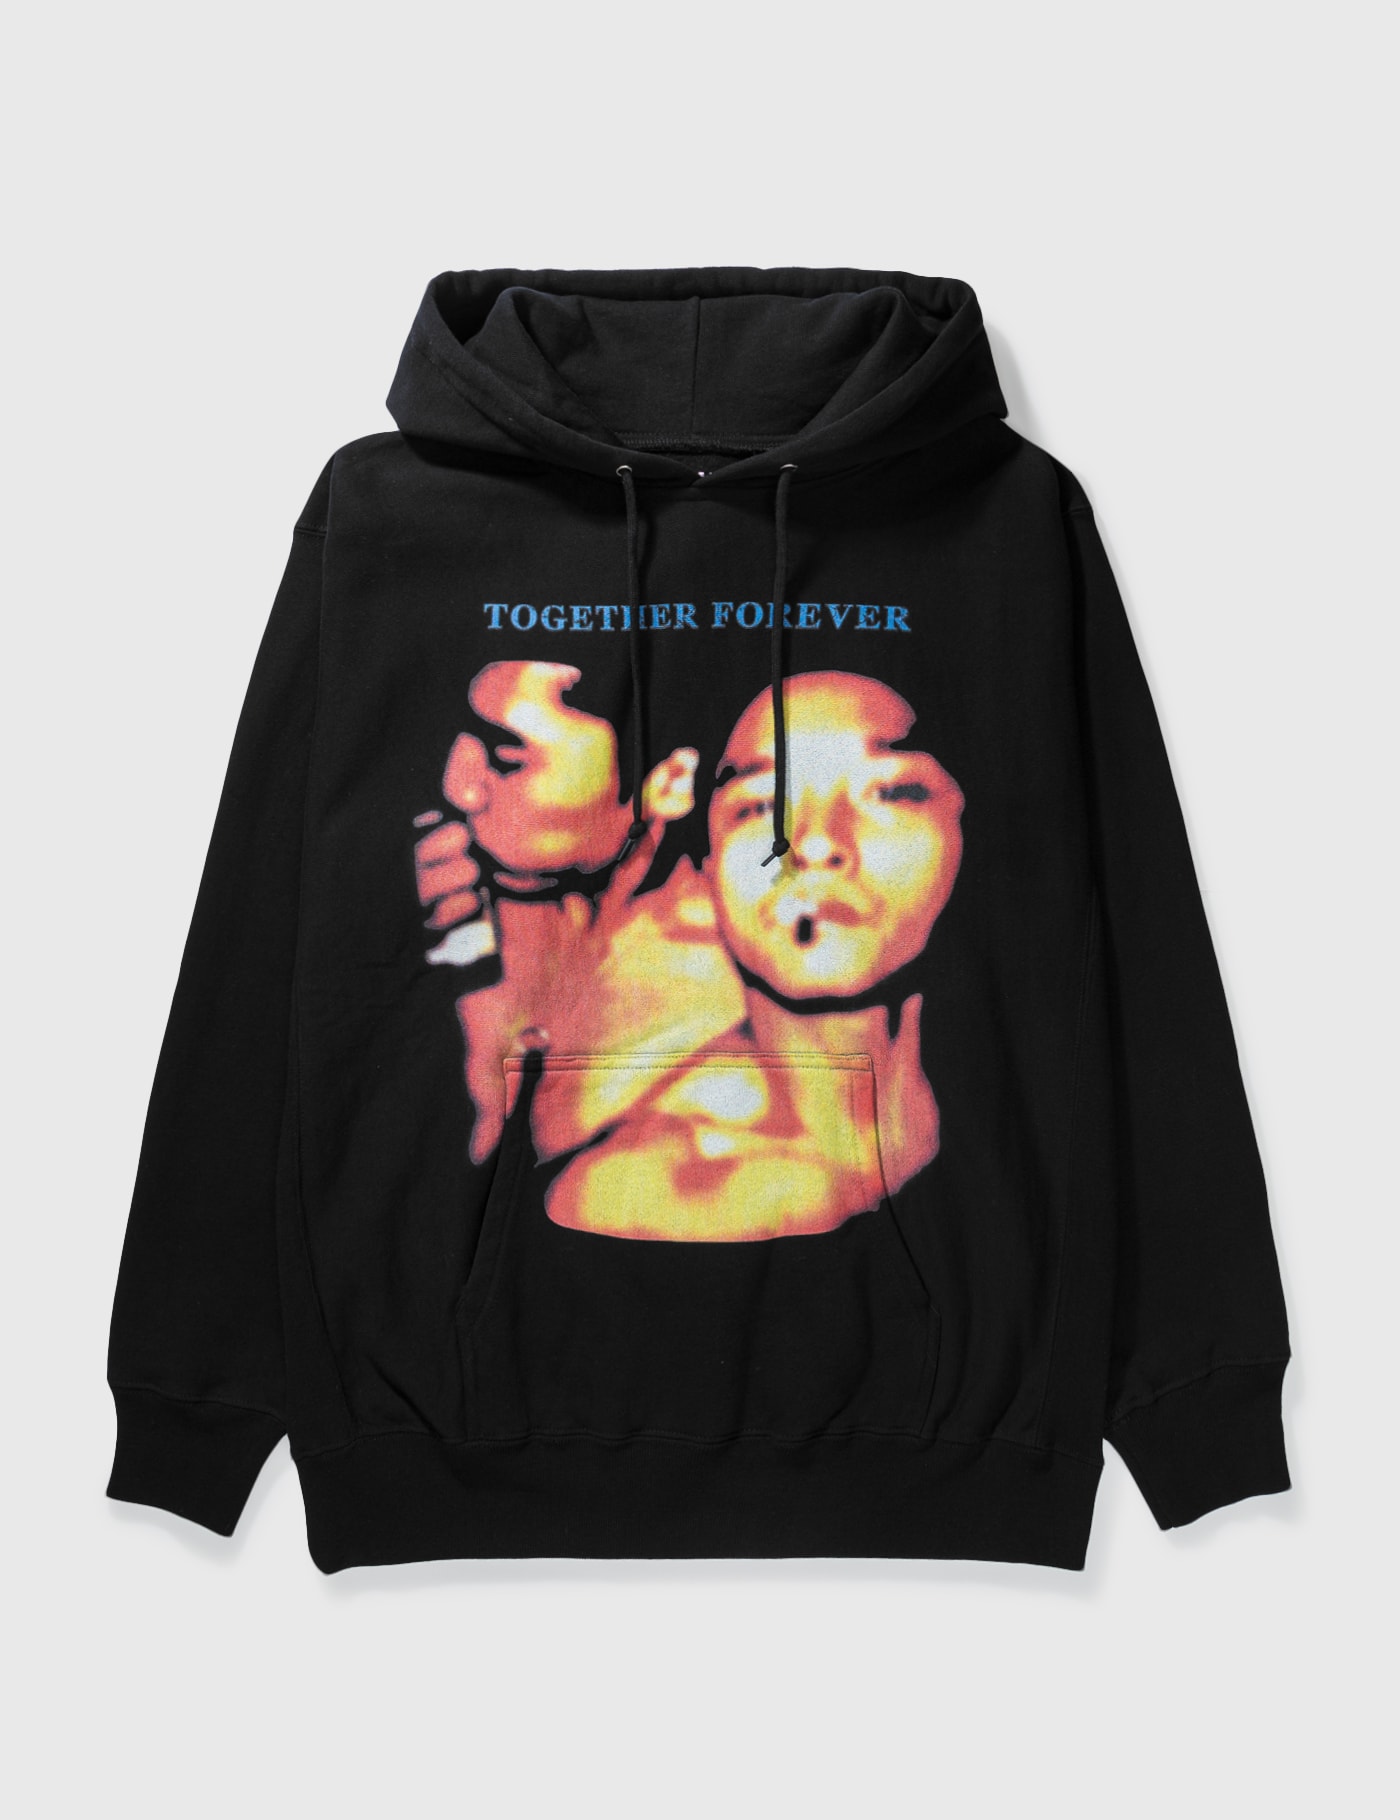 Raw Emotions Together Forever Reverse Weave Hoodie In Black